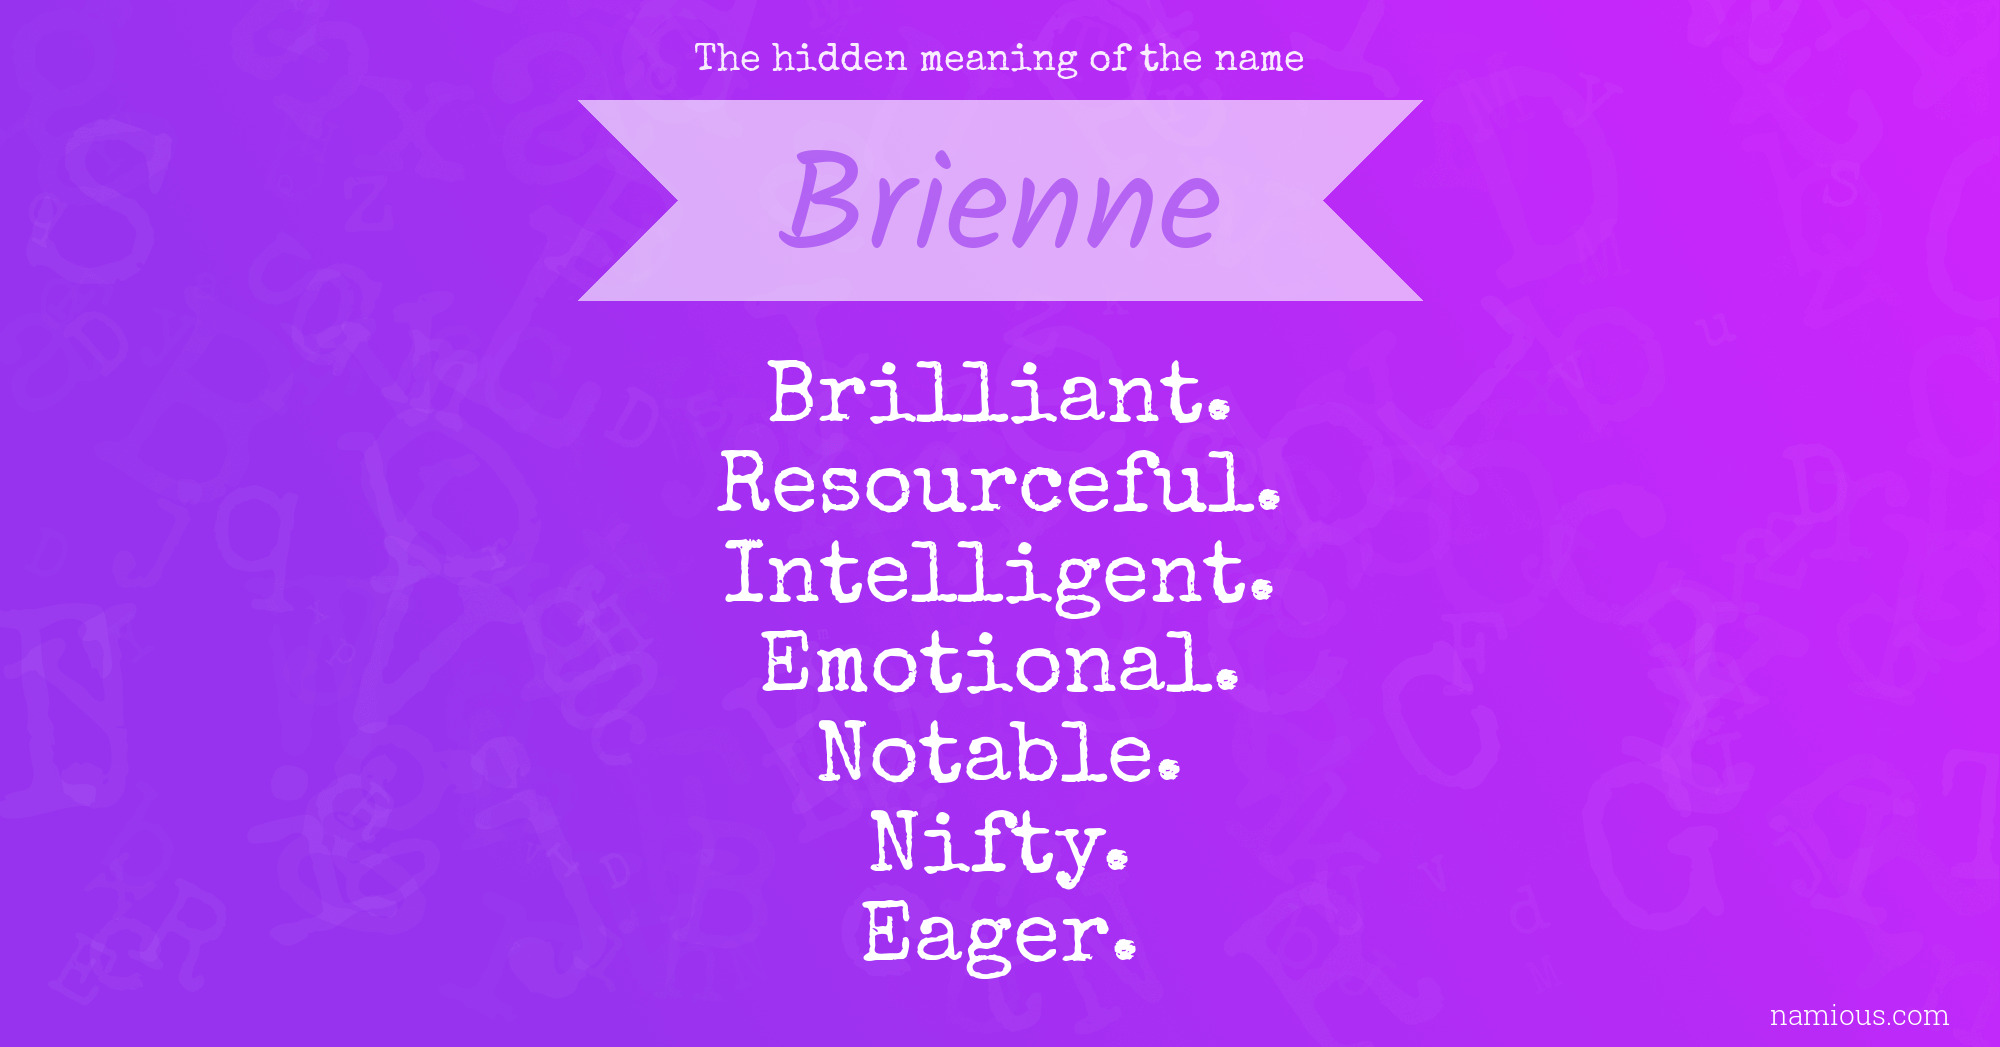 The hidden meaning of the name Brienne